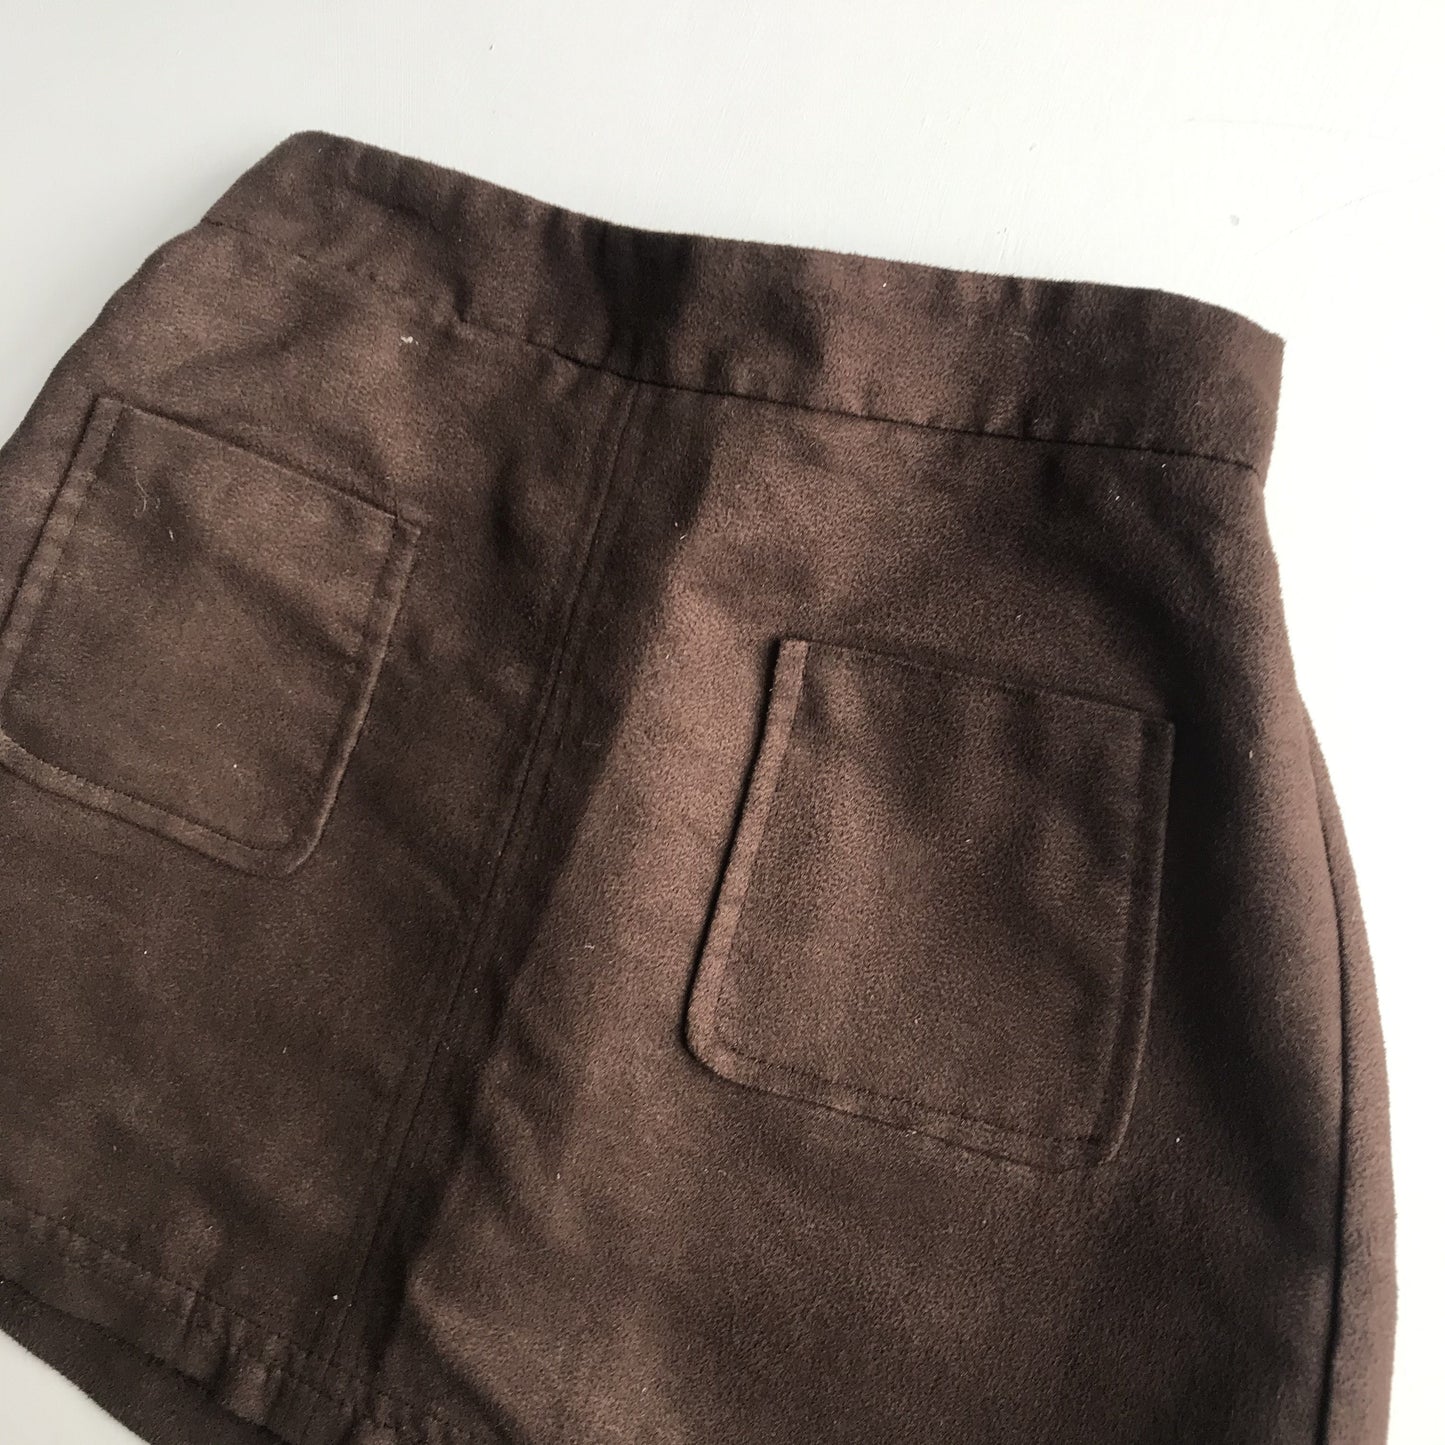 Skirt - Brown Faux Suede - Age 4